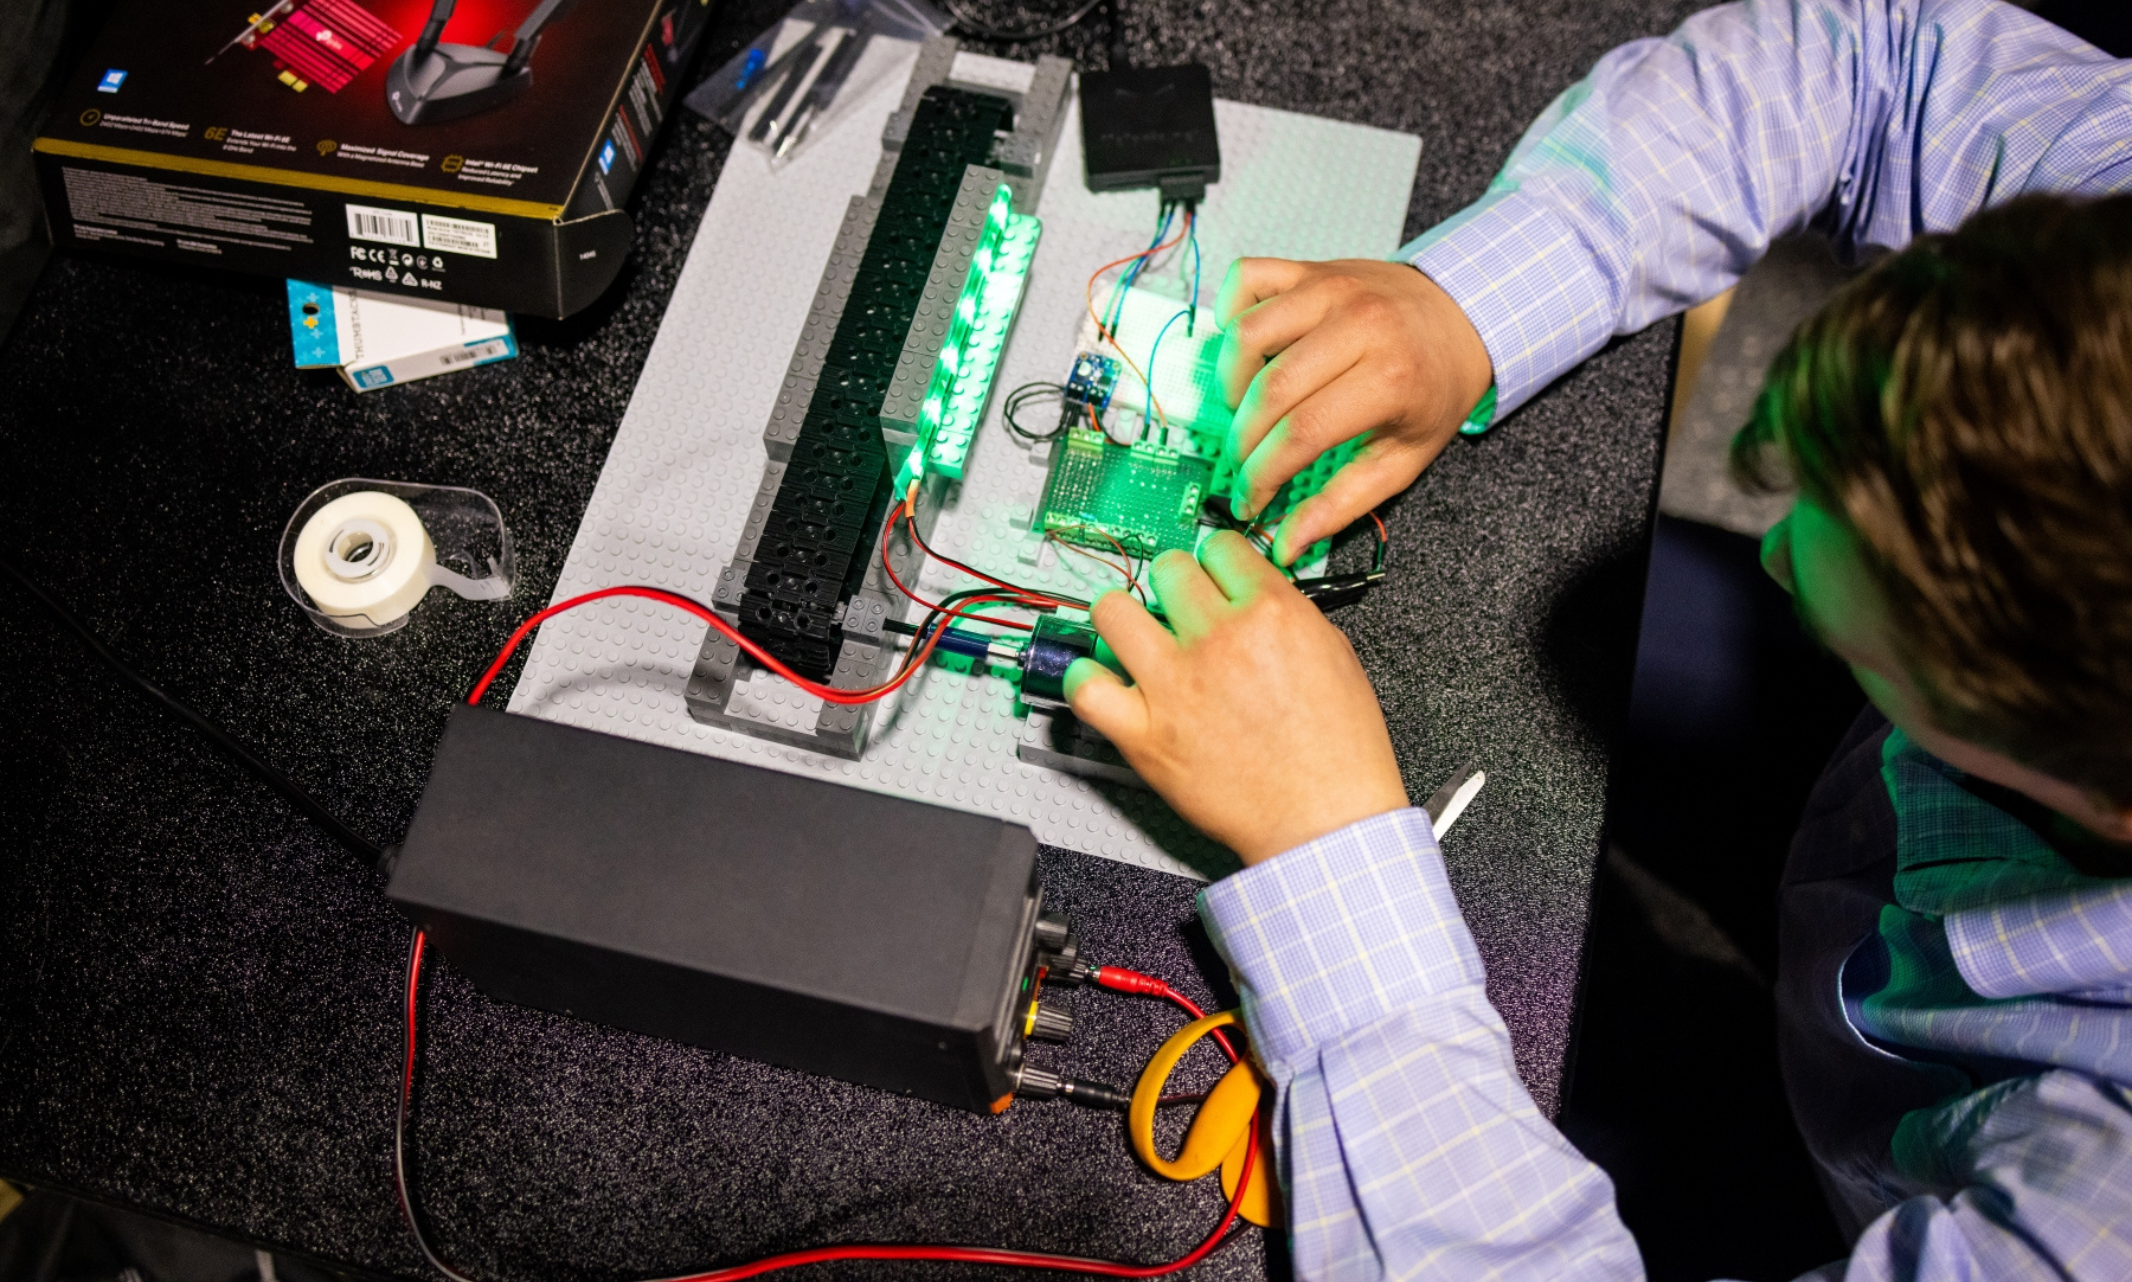 A person works on the inside component of a a computer